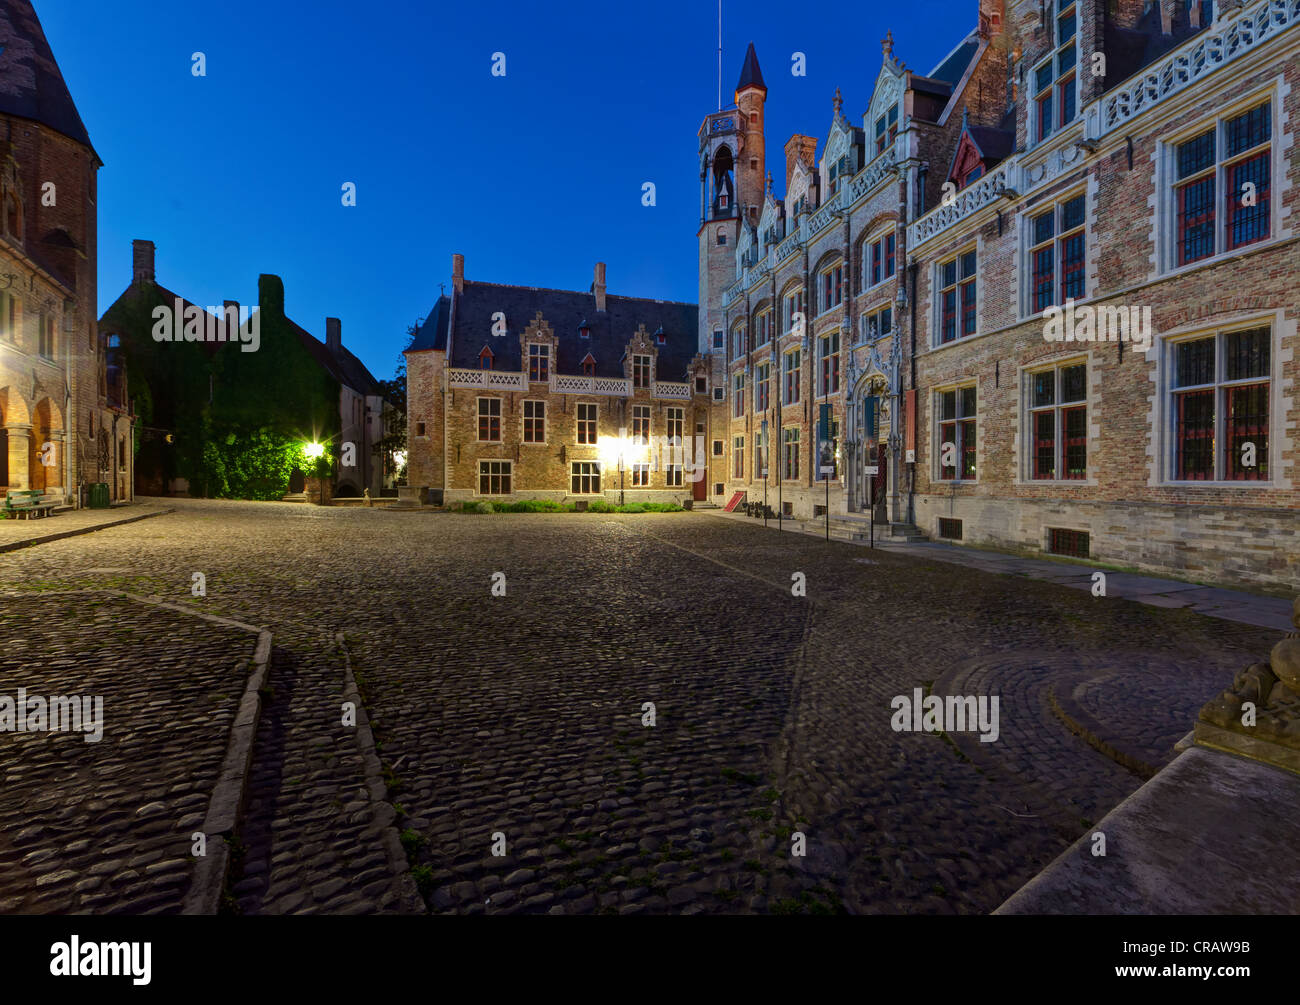 Gruuthusemuseum at the Church of Our Lady, Onze-Lieve-Vrouwekerk, historic town centre of Bruges, UNESCO World Heritage Site Stock Photo